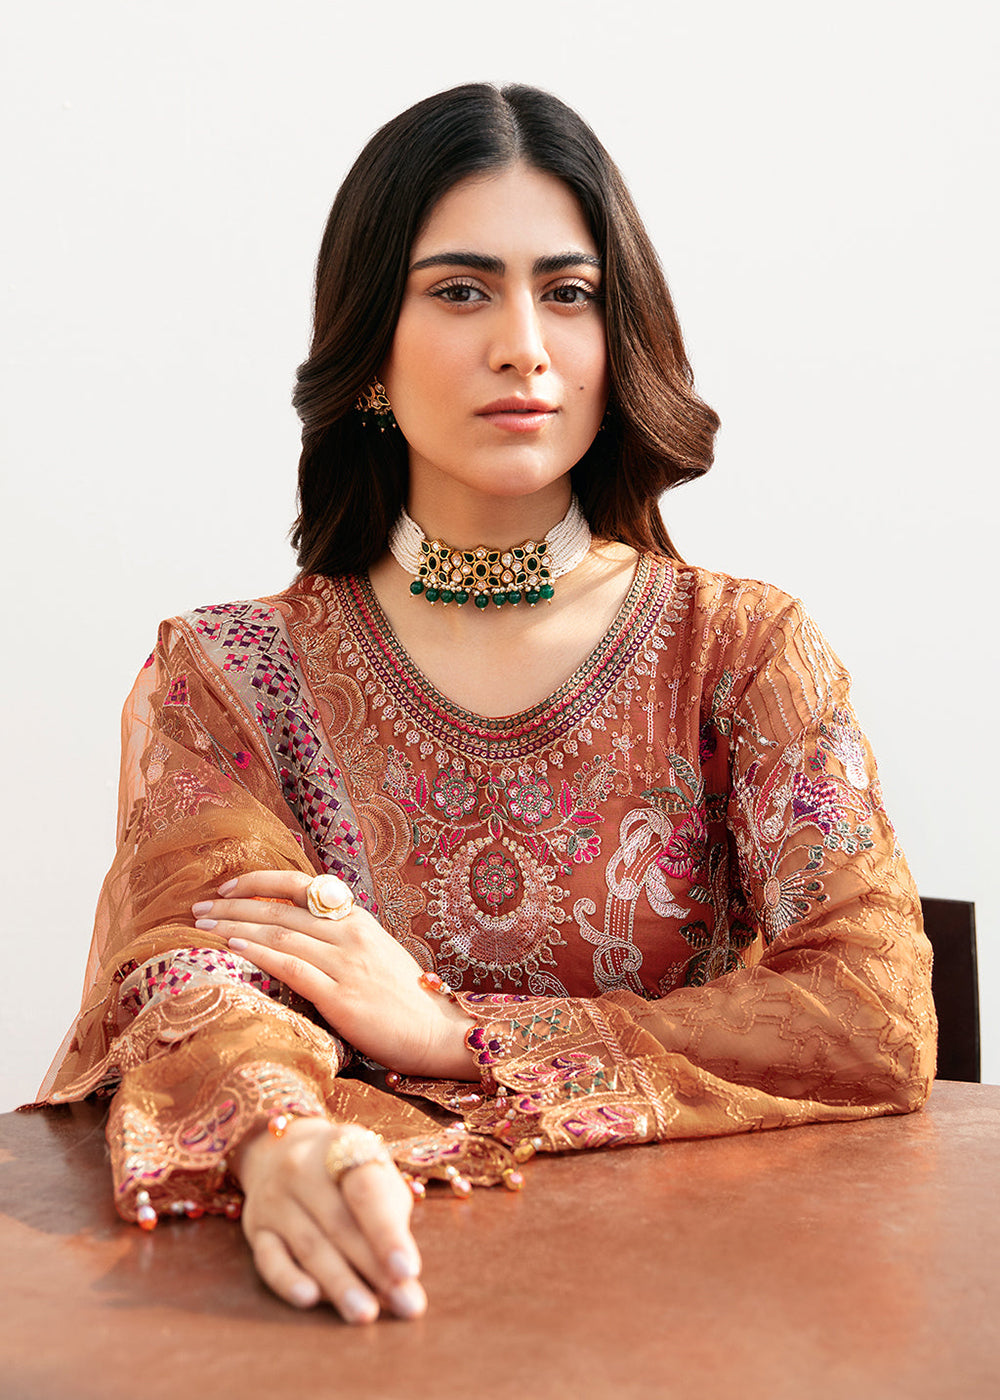 Buy Now Chevron Chiffon Collection Volume 8 by Ramsha | A-810 Online at Empress in USA, UK, Canada & Worldwide at Empress Clothing. 